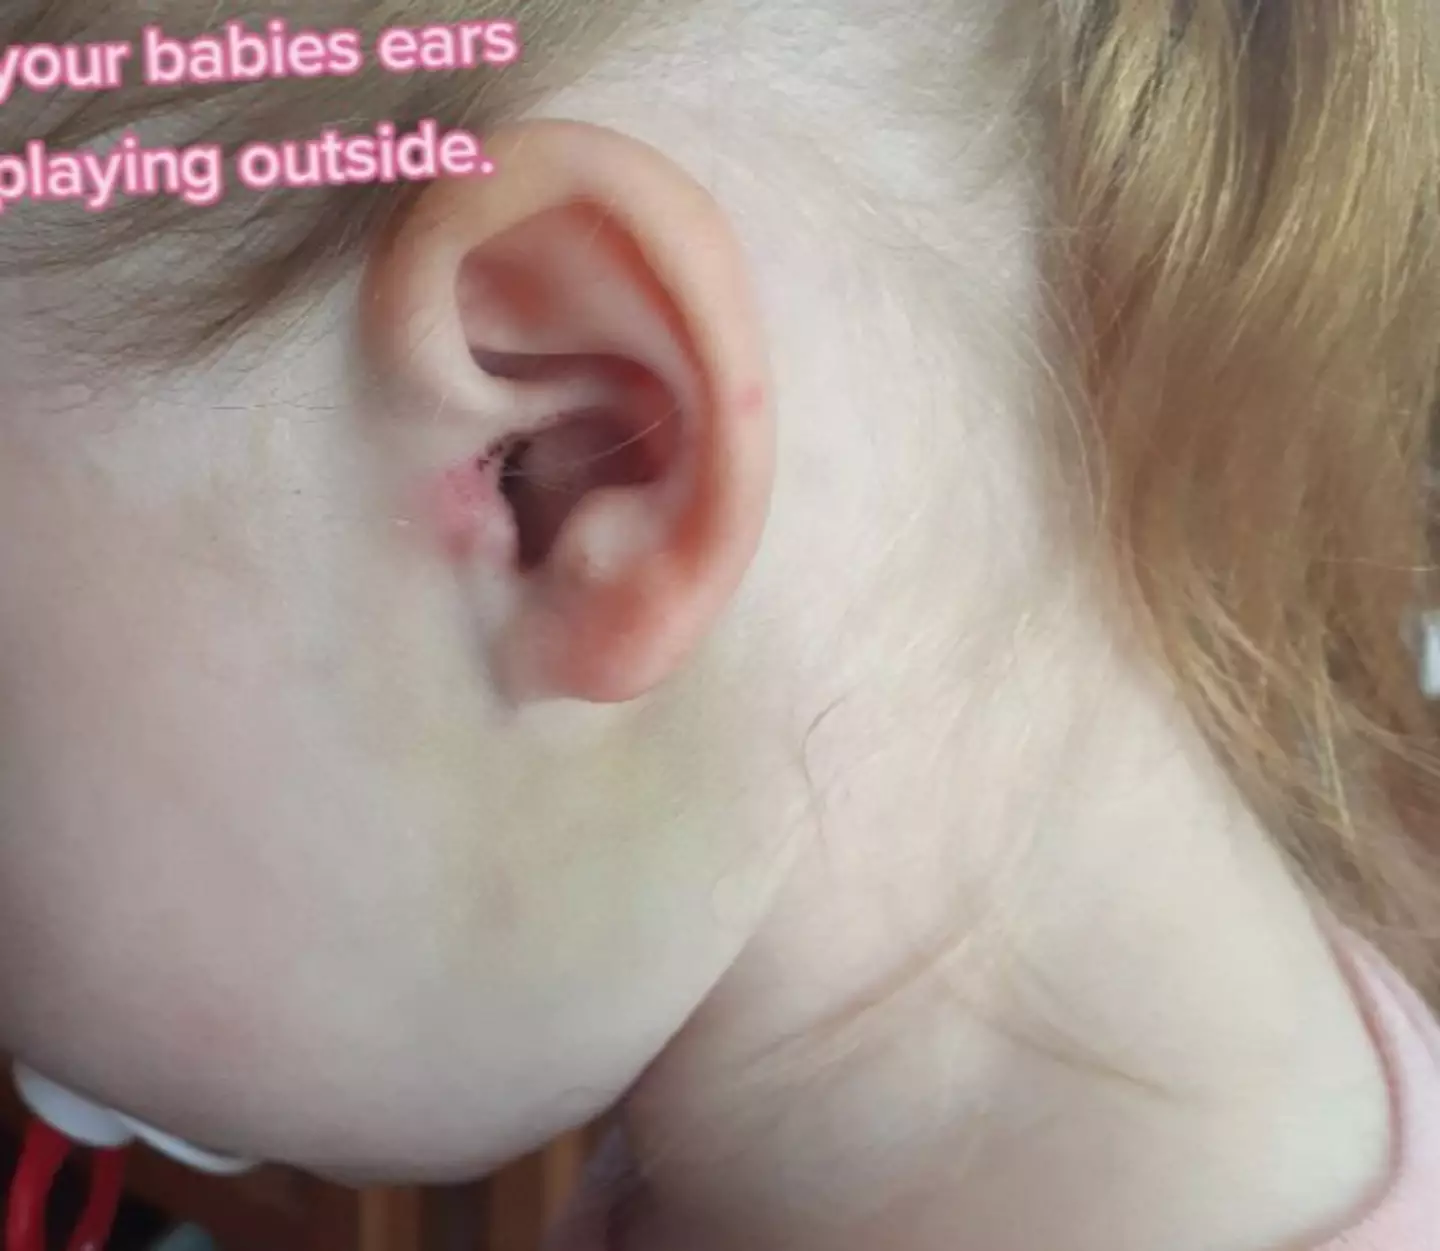 Averie's ear was left bruised after the incident.